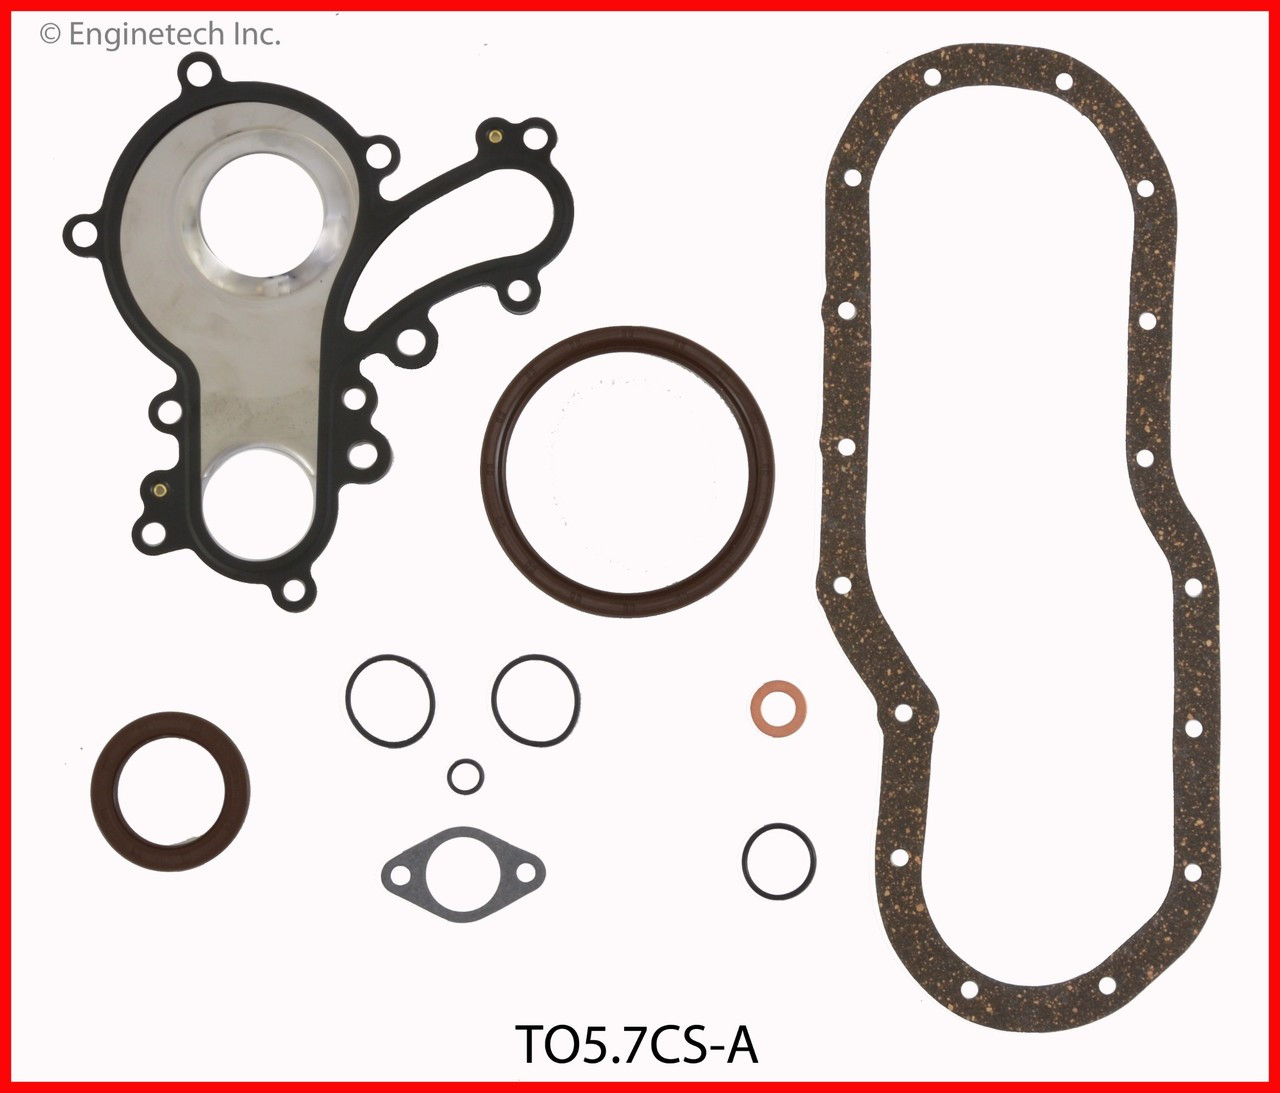 2008 Toyota Sequoia 5.7L Engine Lower Gasket Set TO5.7CS-A -4